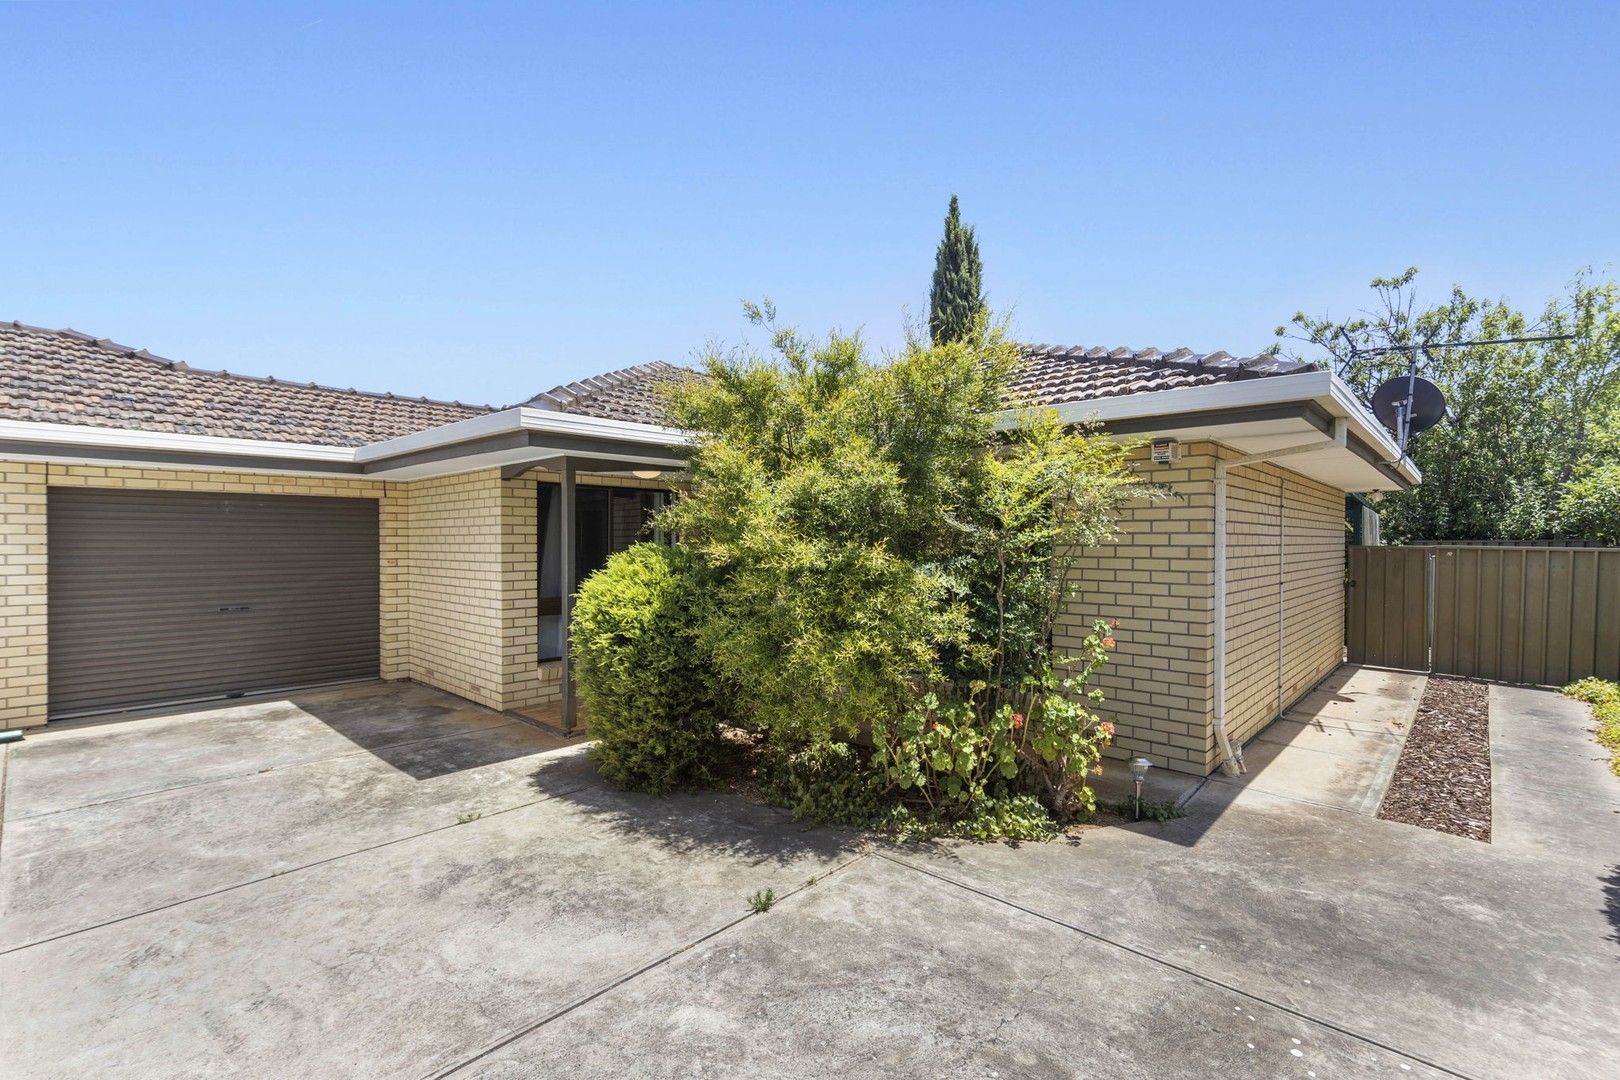 3 bedrooms Apartment / Unit / Flat in 3/31 Fourth Avenue ASCOT PARK SA, 5043